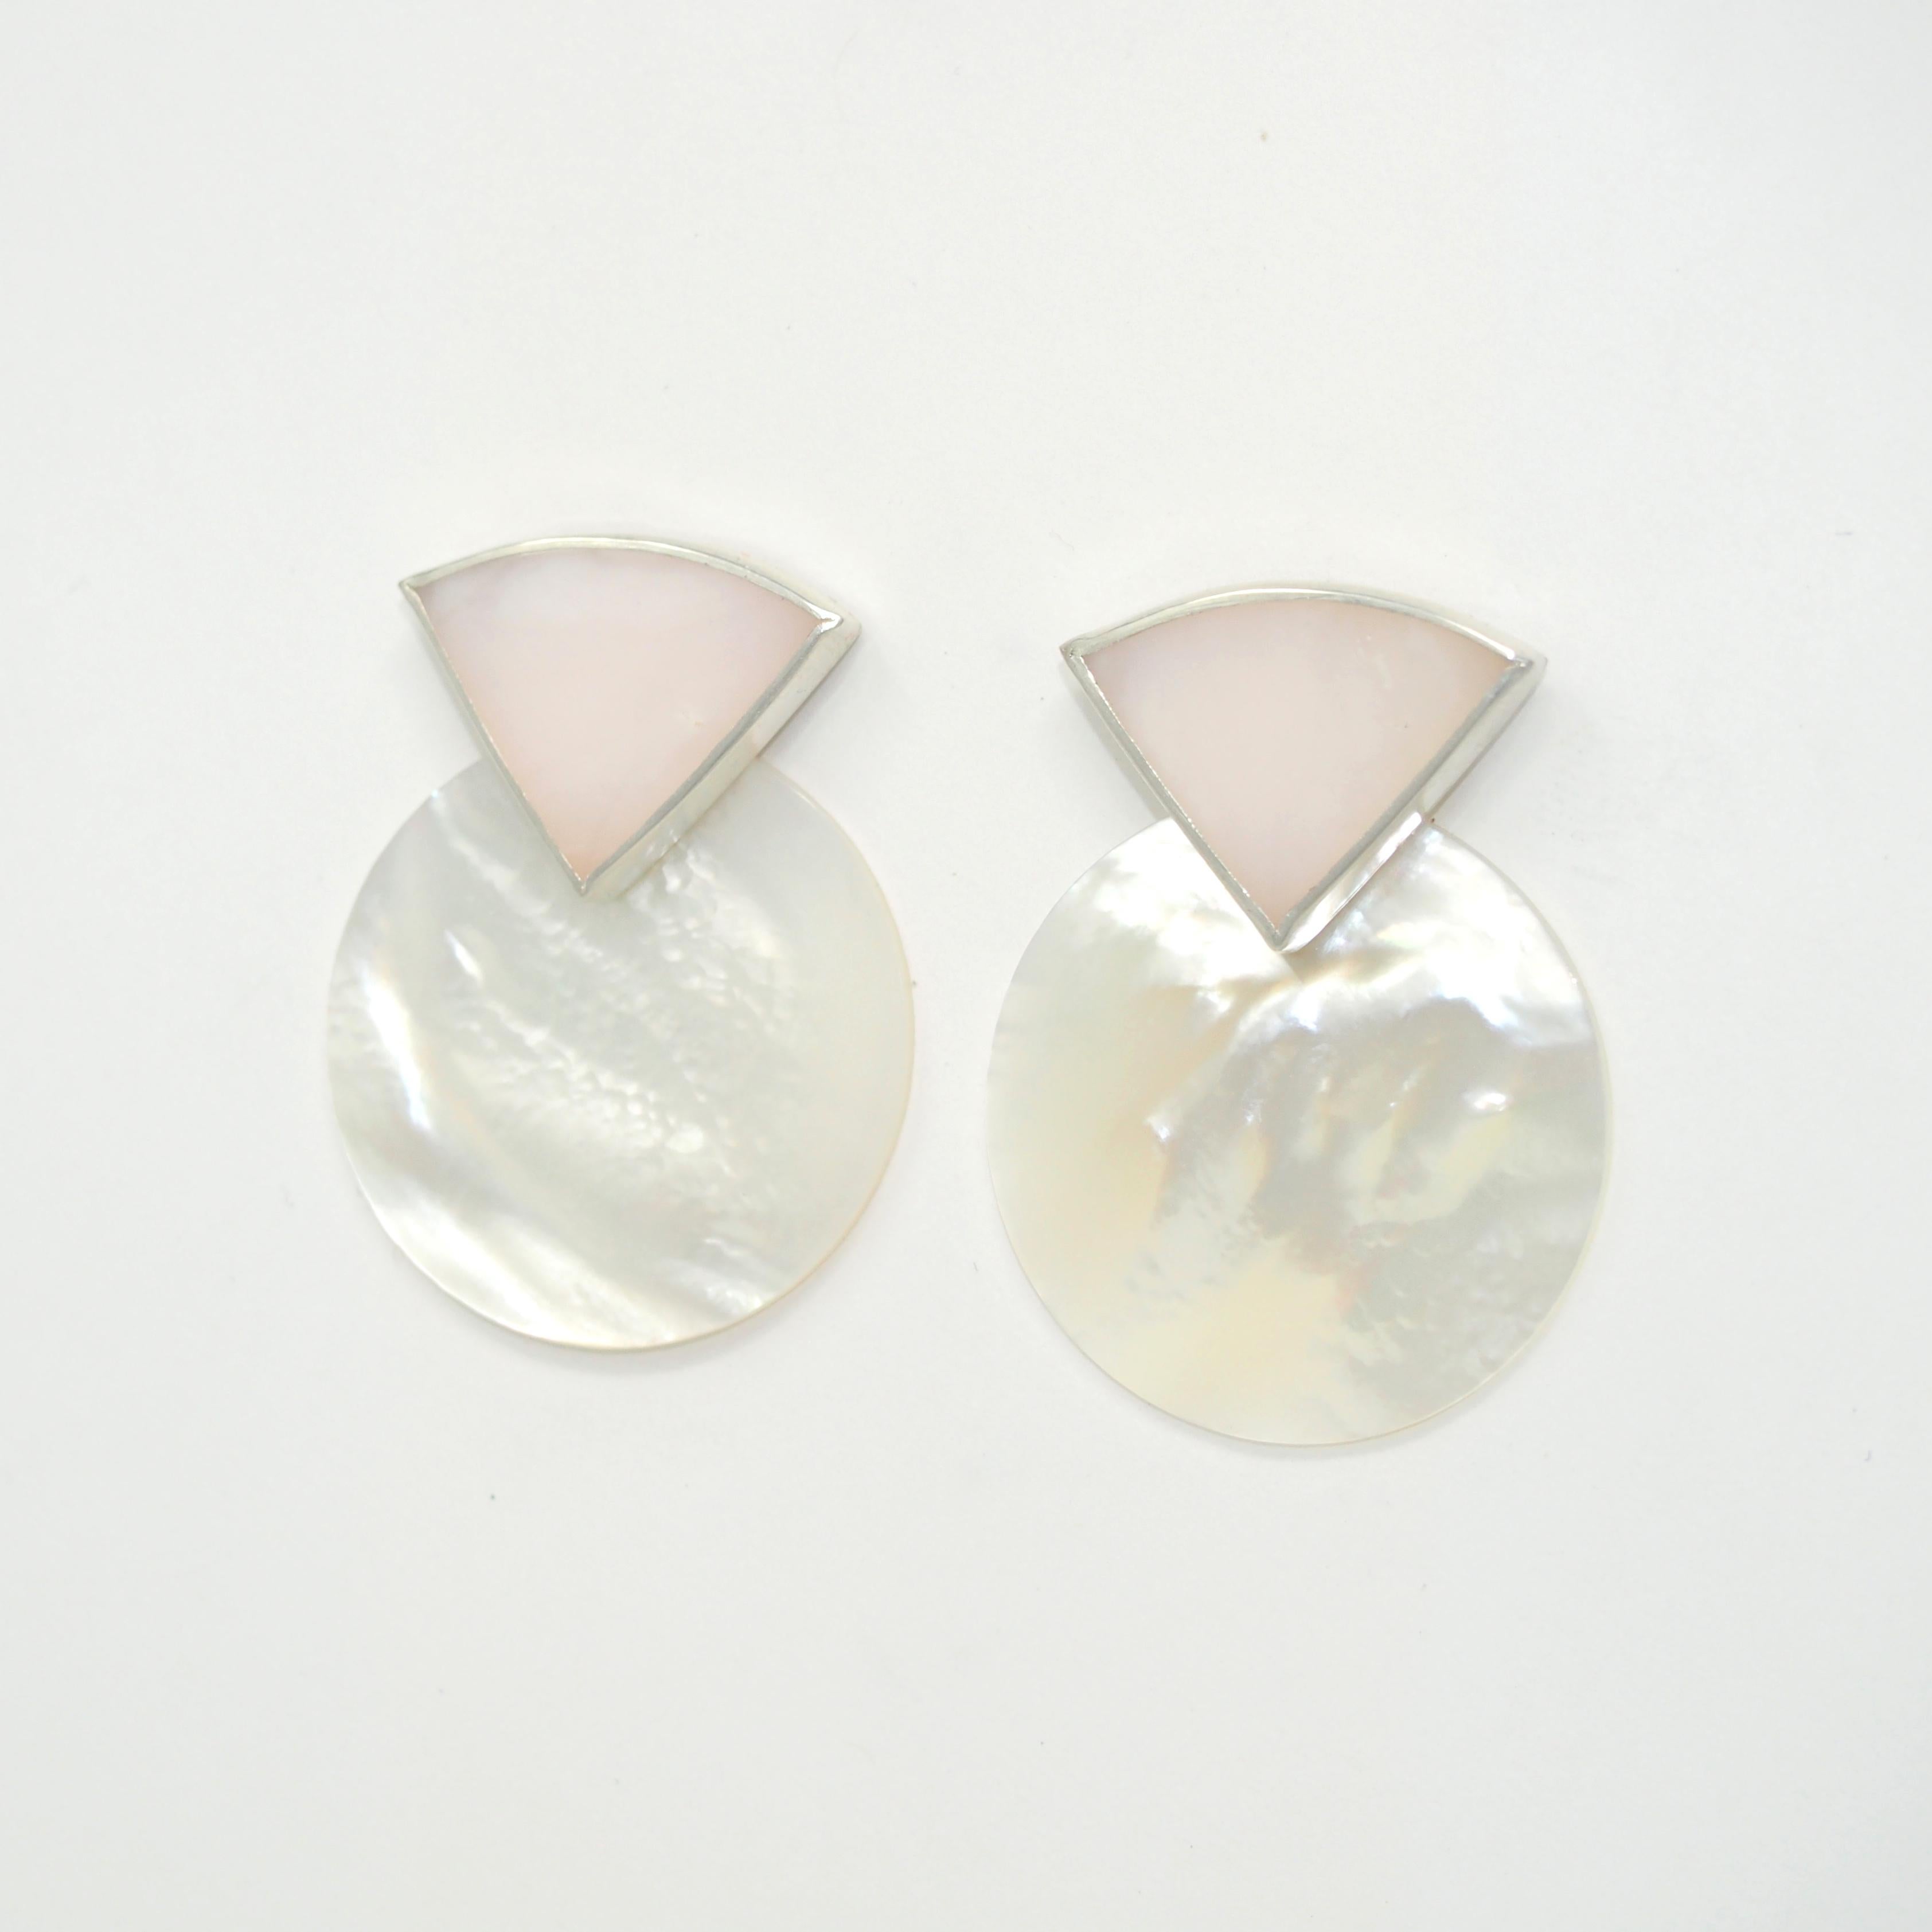 Uncut Octave Jewelry Sterling Silver Sunrise Earring in Pink Opal and Mother of Pearl For Sale